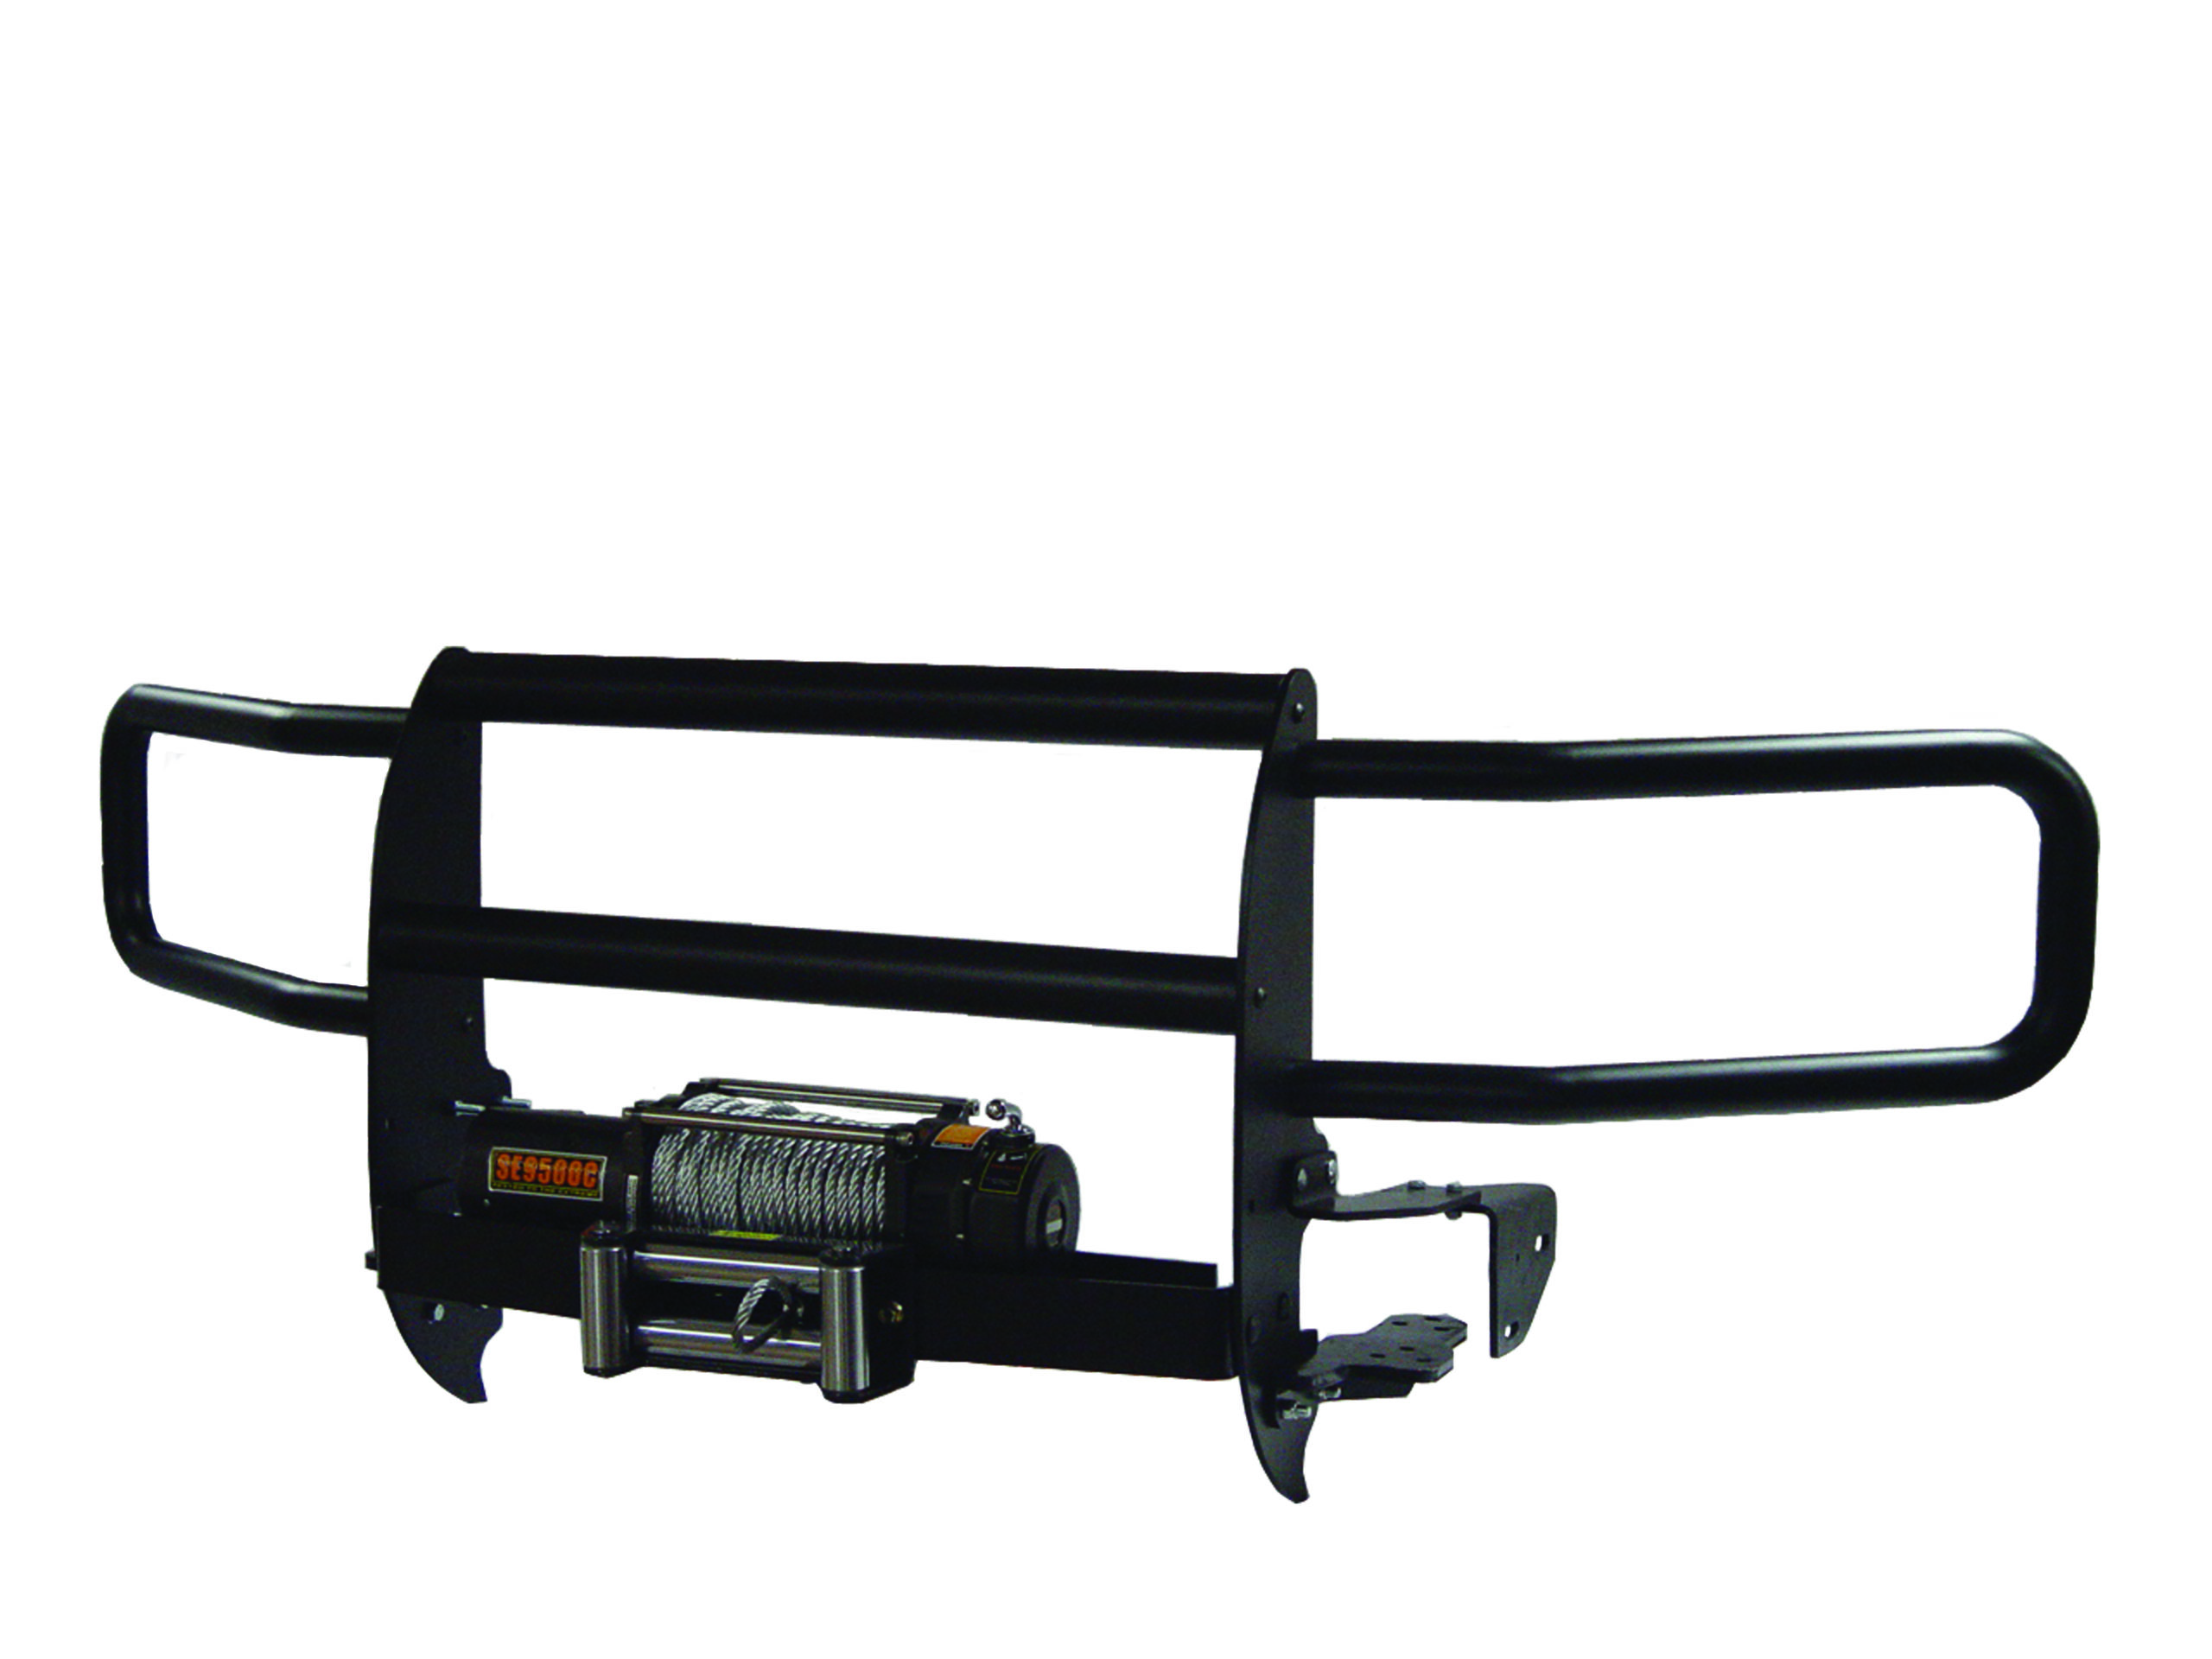 Winch Grille Guards System 1